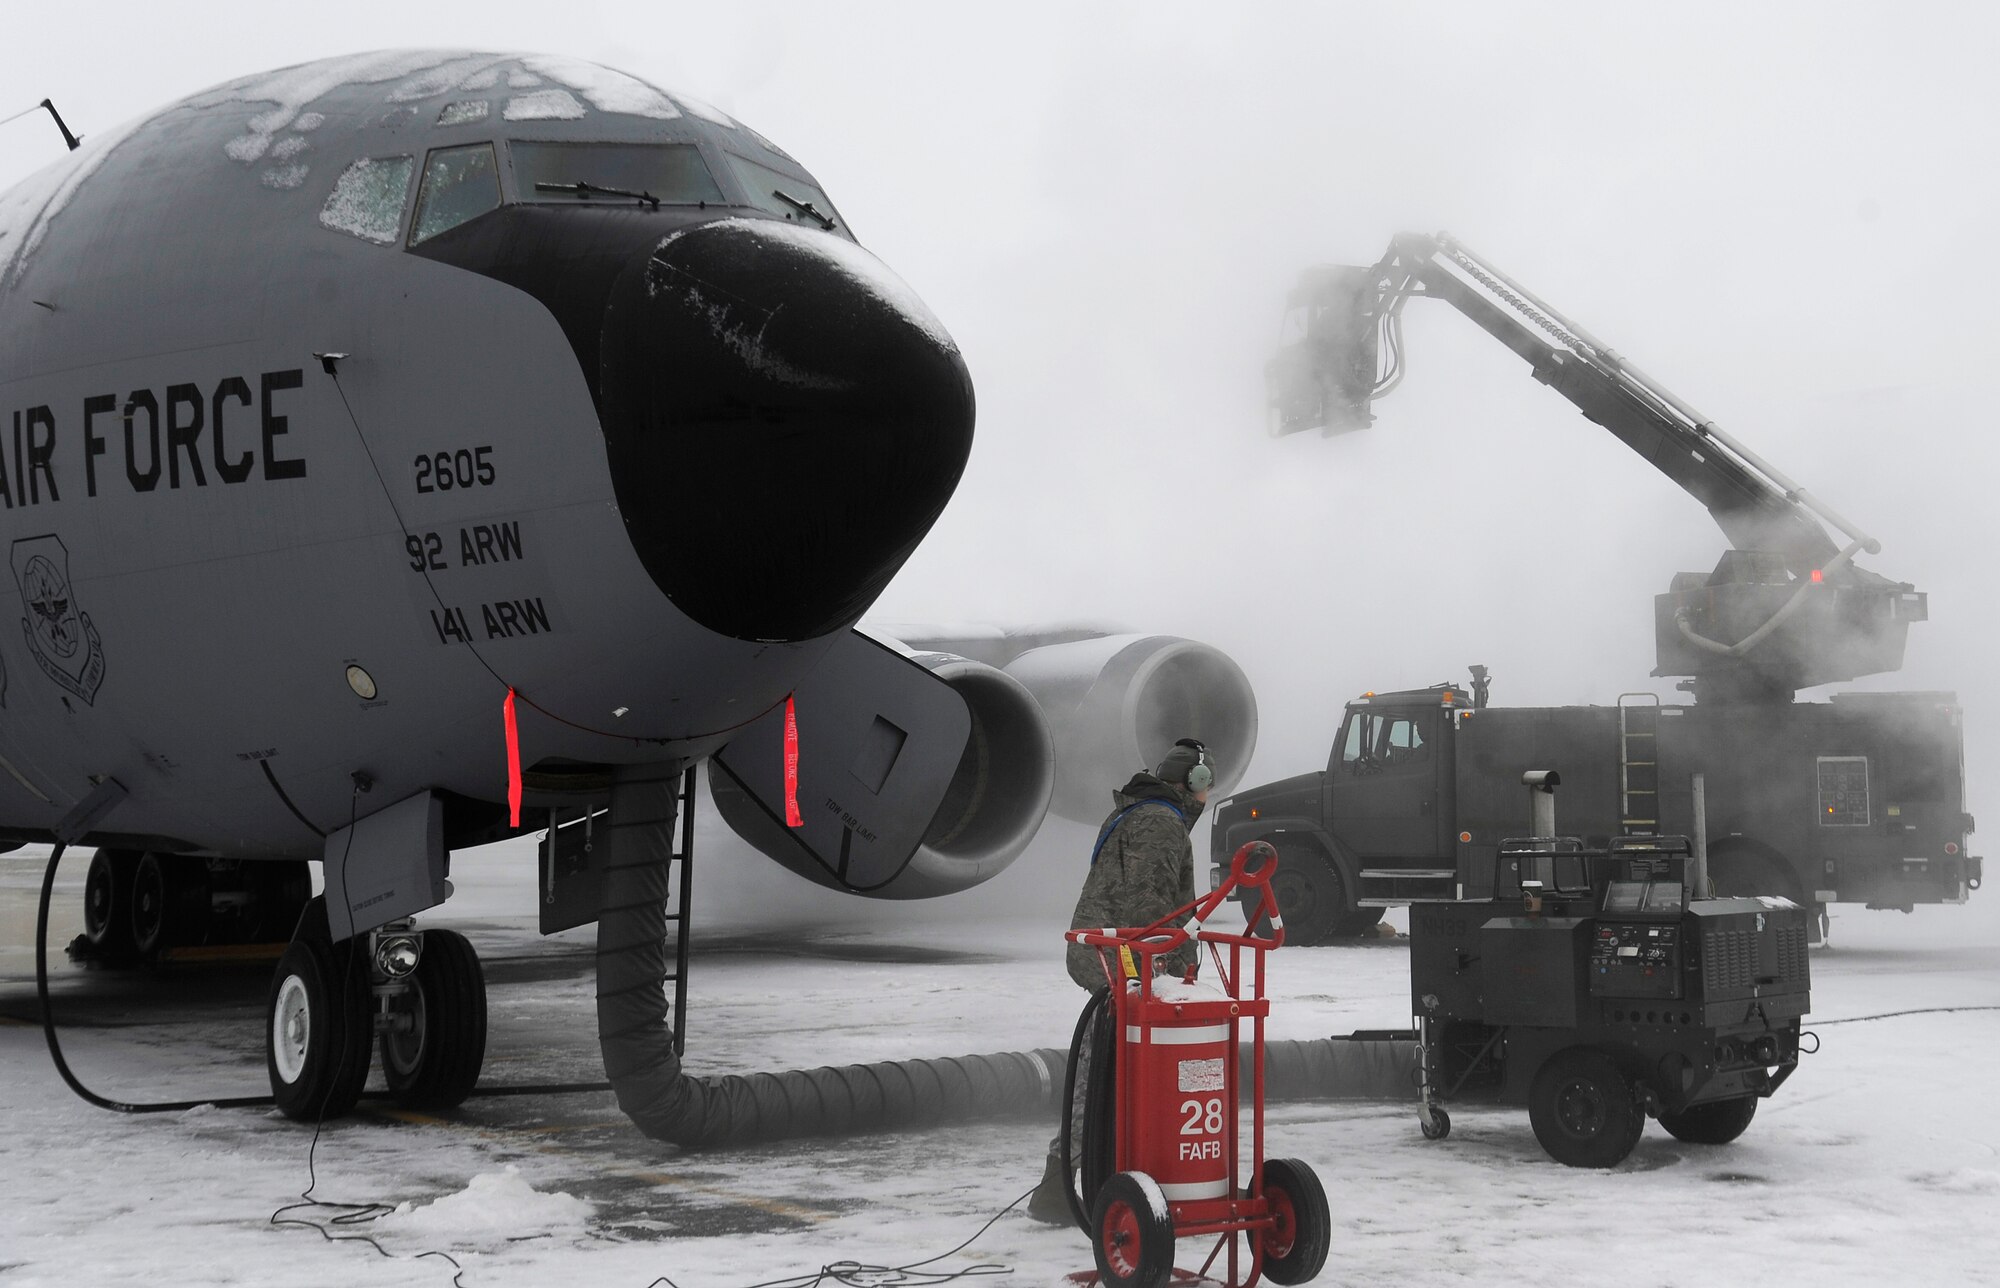 Members from the 92nd and 141st Aircraft Maintenance Squadrons apply de-icier and anti-ice chemicals to a KC-135 Stratontanker on the flight line at Fairchild Air Force Base, Wash., Jan. 24, 2013. It is essential to remove any snow or ice that may have formed on the aircraft as it can compromise the aircrafts performance during flight. (U.S. Air Force photo by Airman 1st Class Ryan Zeski)